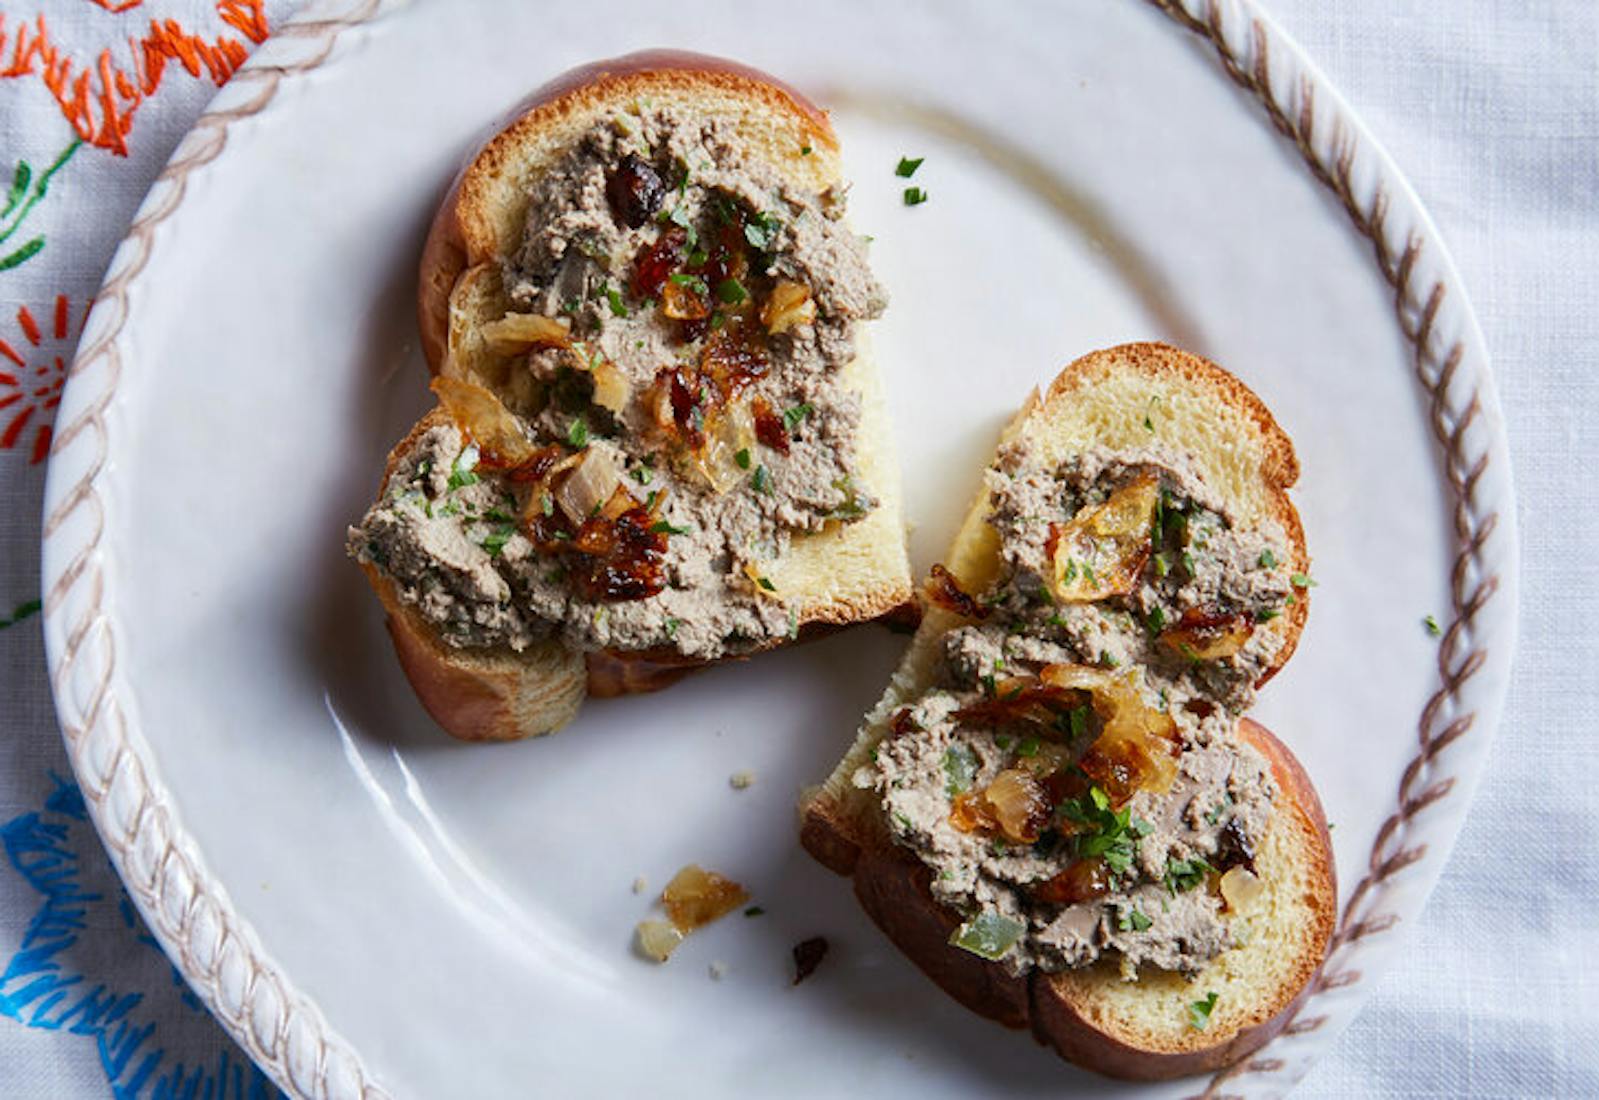 Chopped liver with caramelized onions and parsley on sliced challah, atop embroidered white tablecloth.